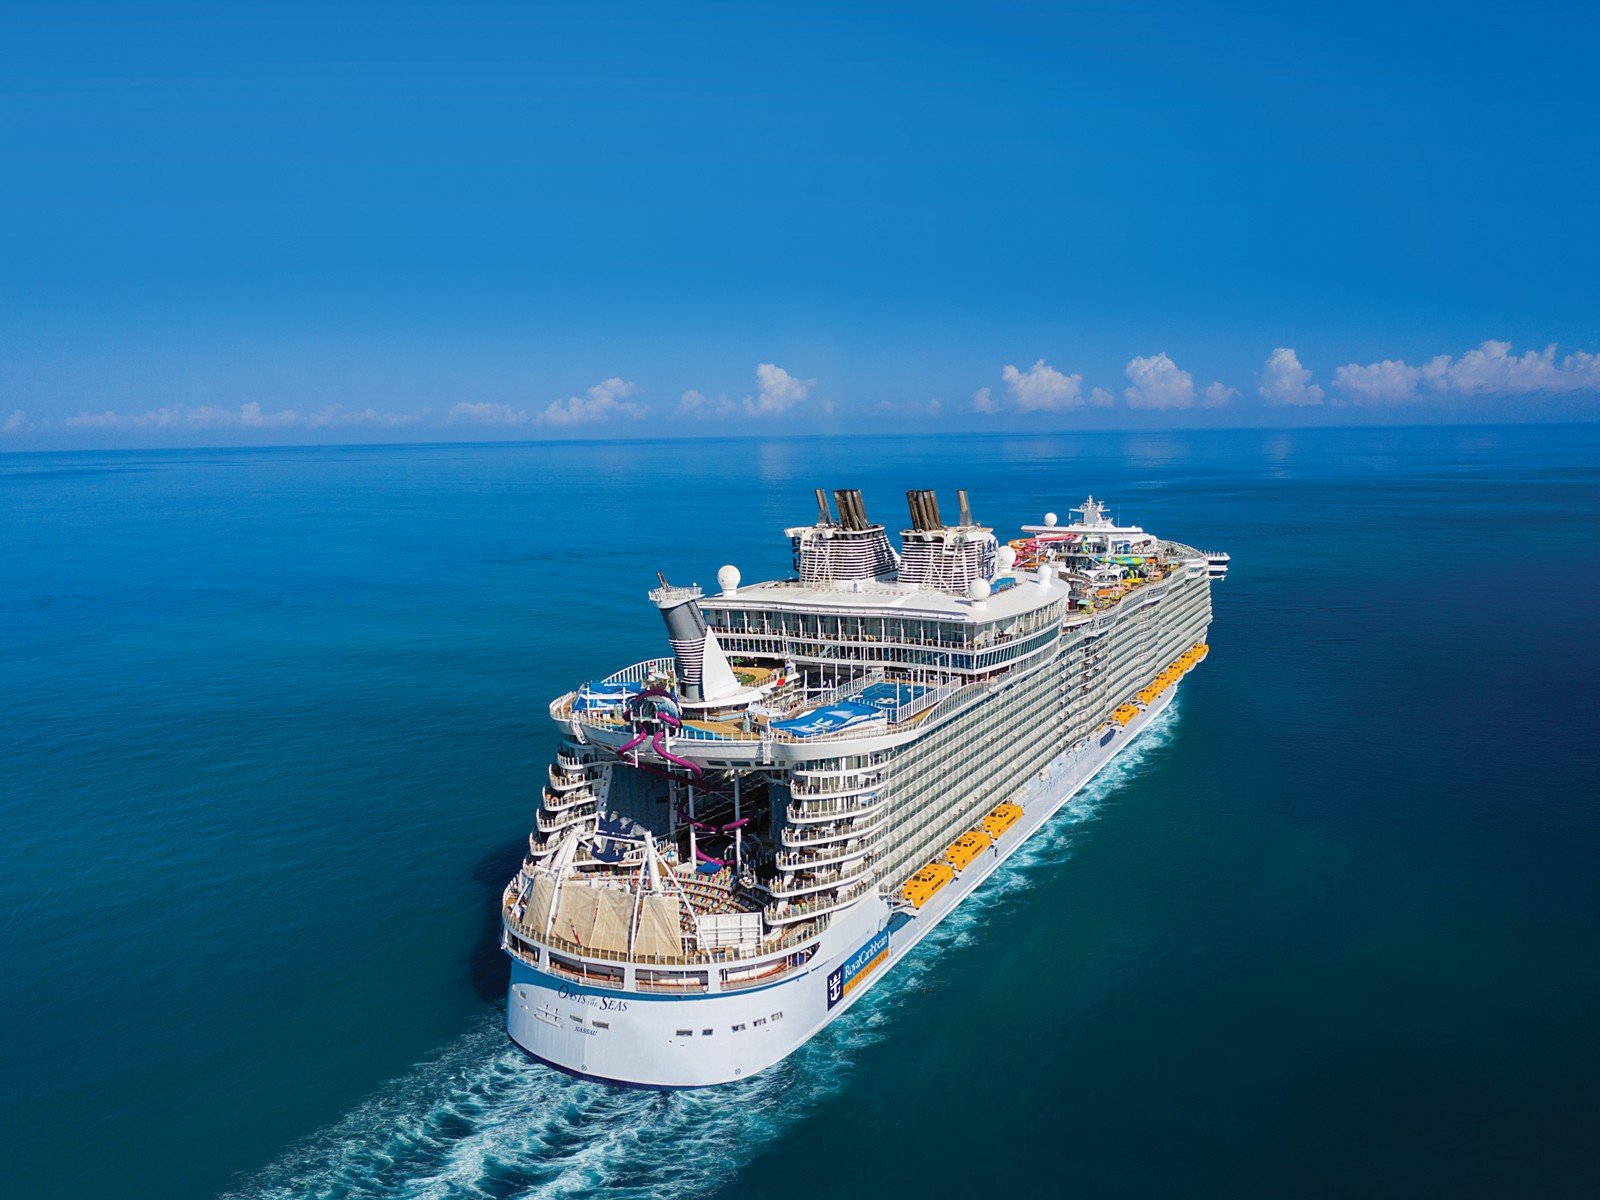 5 recommendations for wearing masks on cruise ships by the Healthy Sail Panel | Royal Caribbean Blog